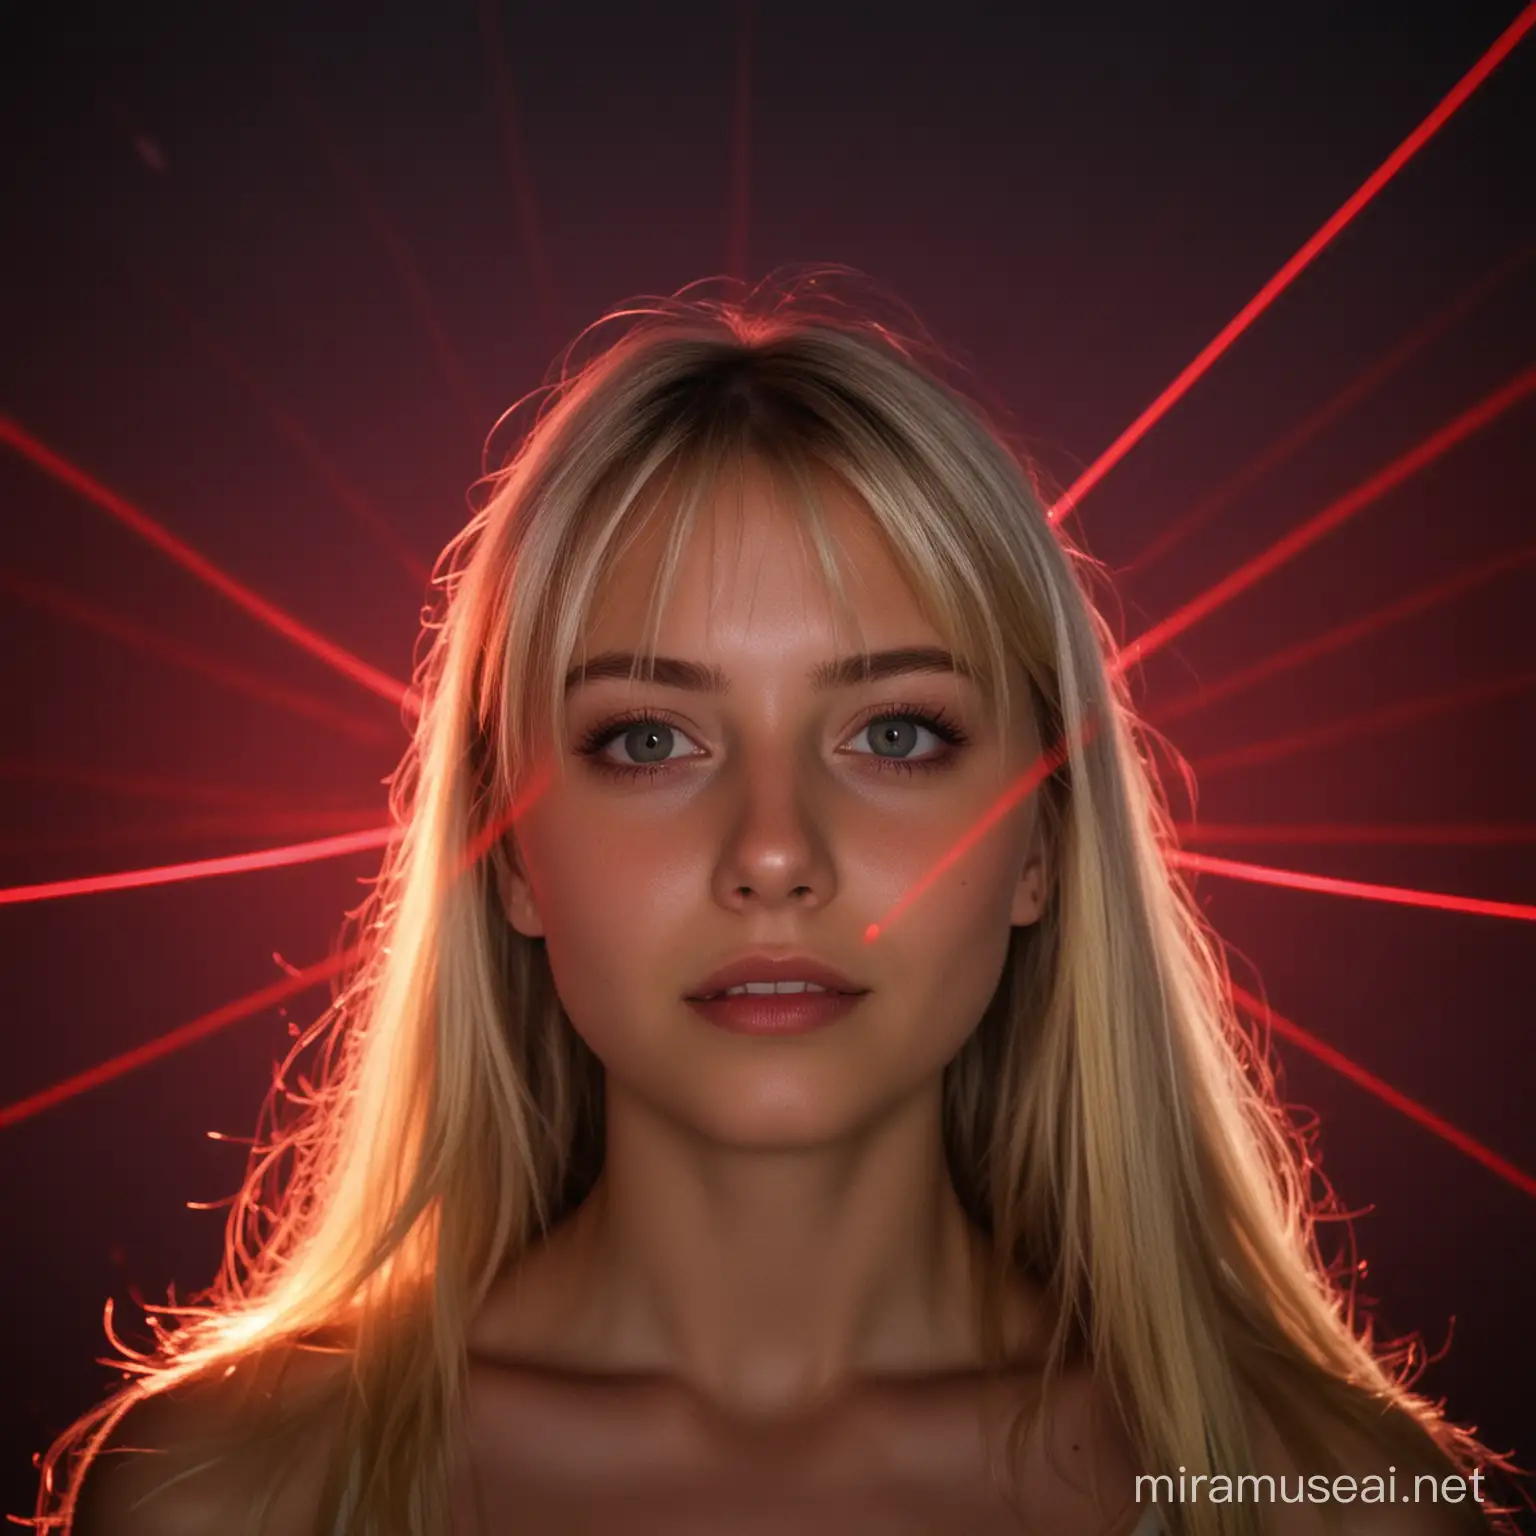 A blonde girl's under red laser lights viewed from 3 meters ahead in the dark.